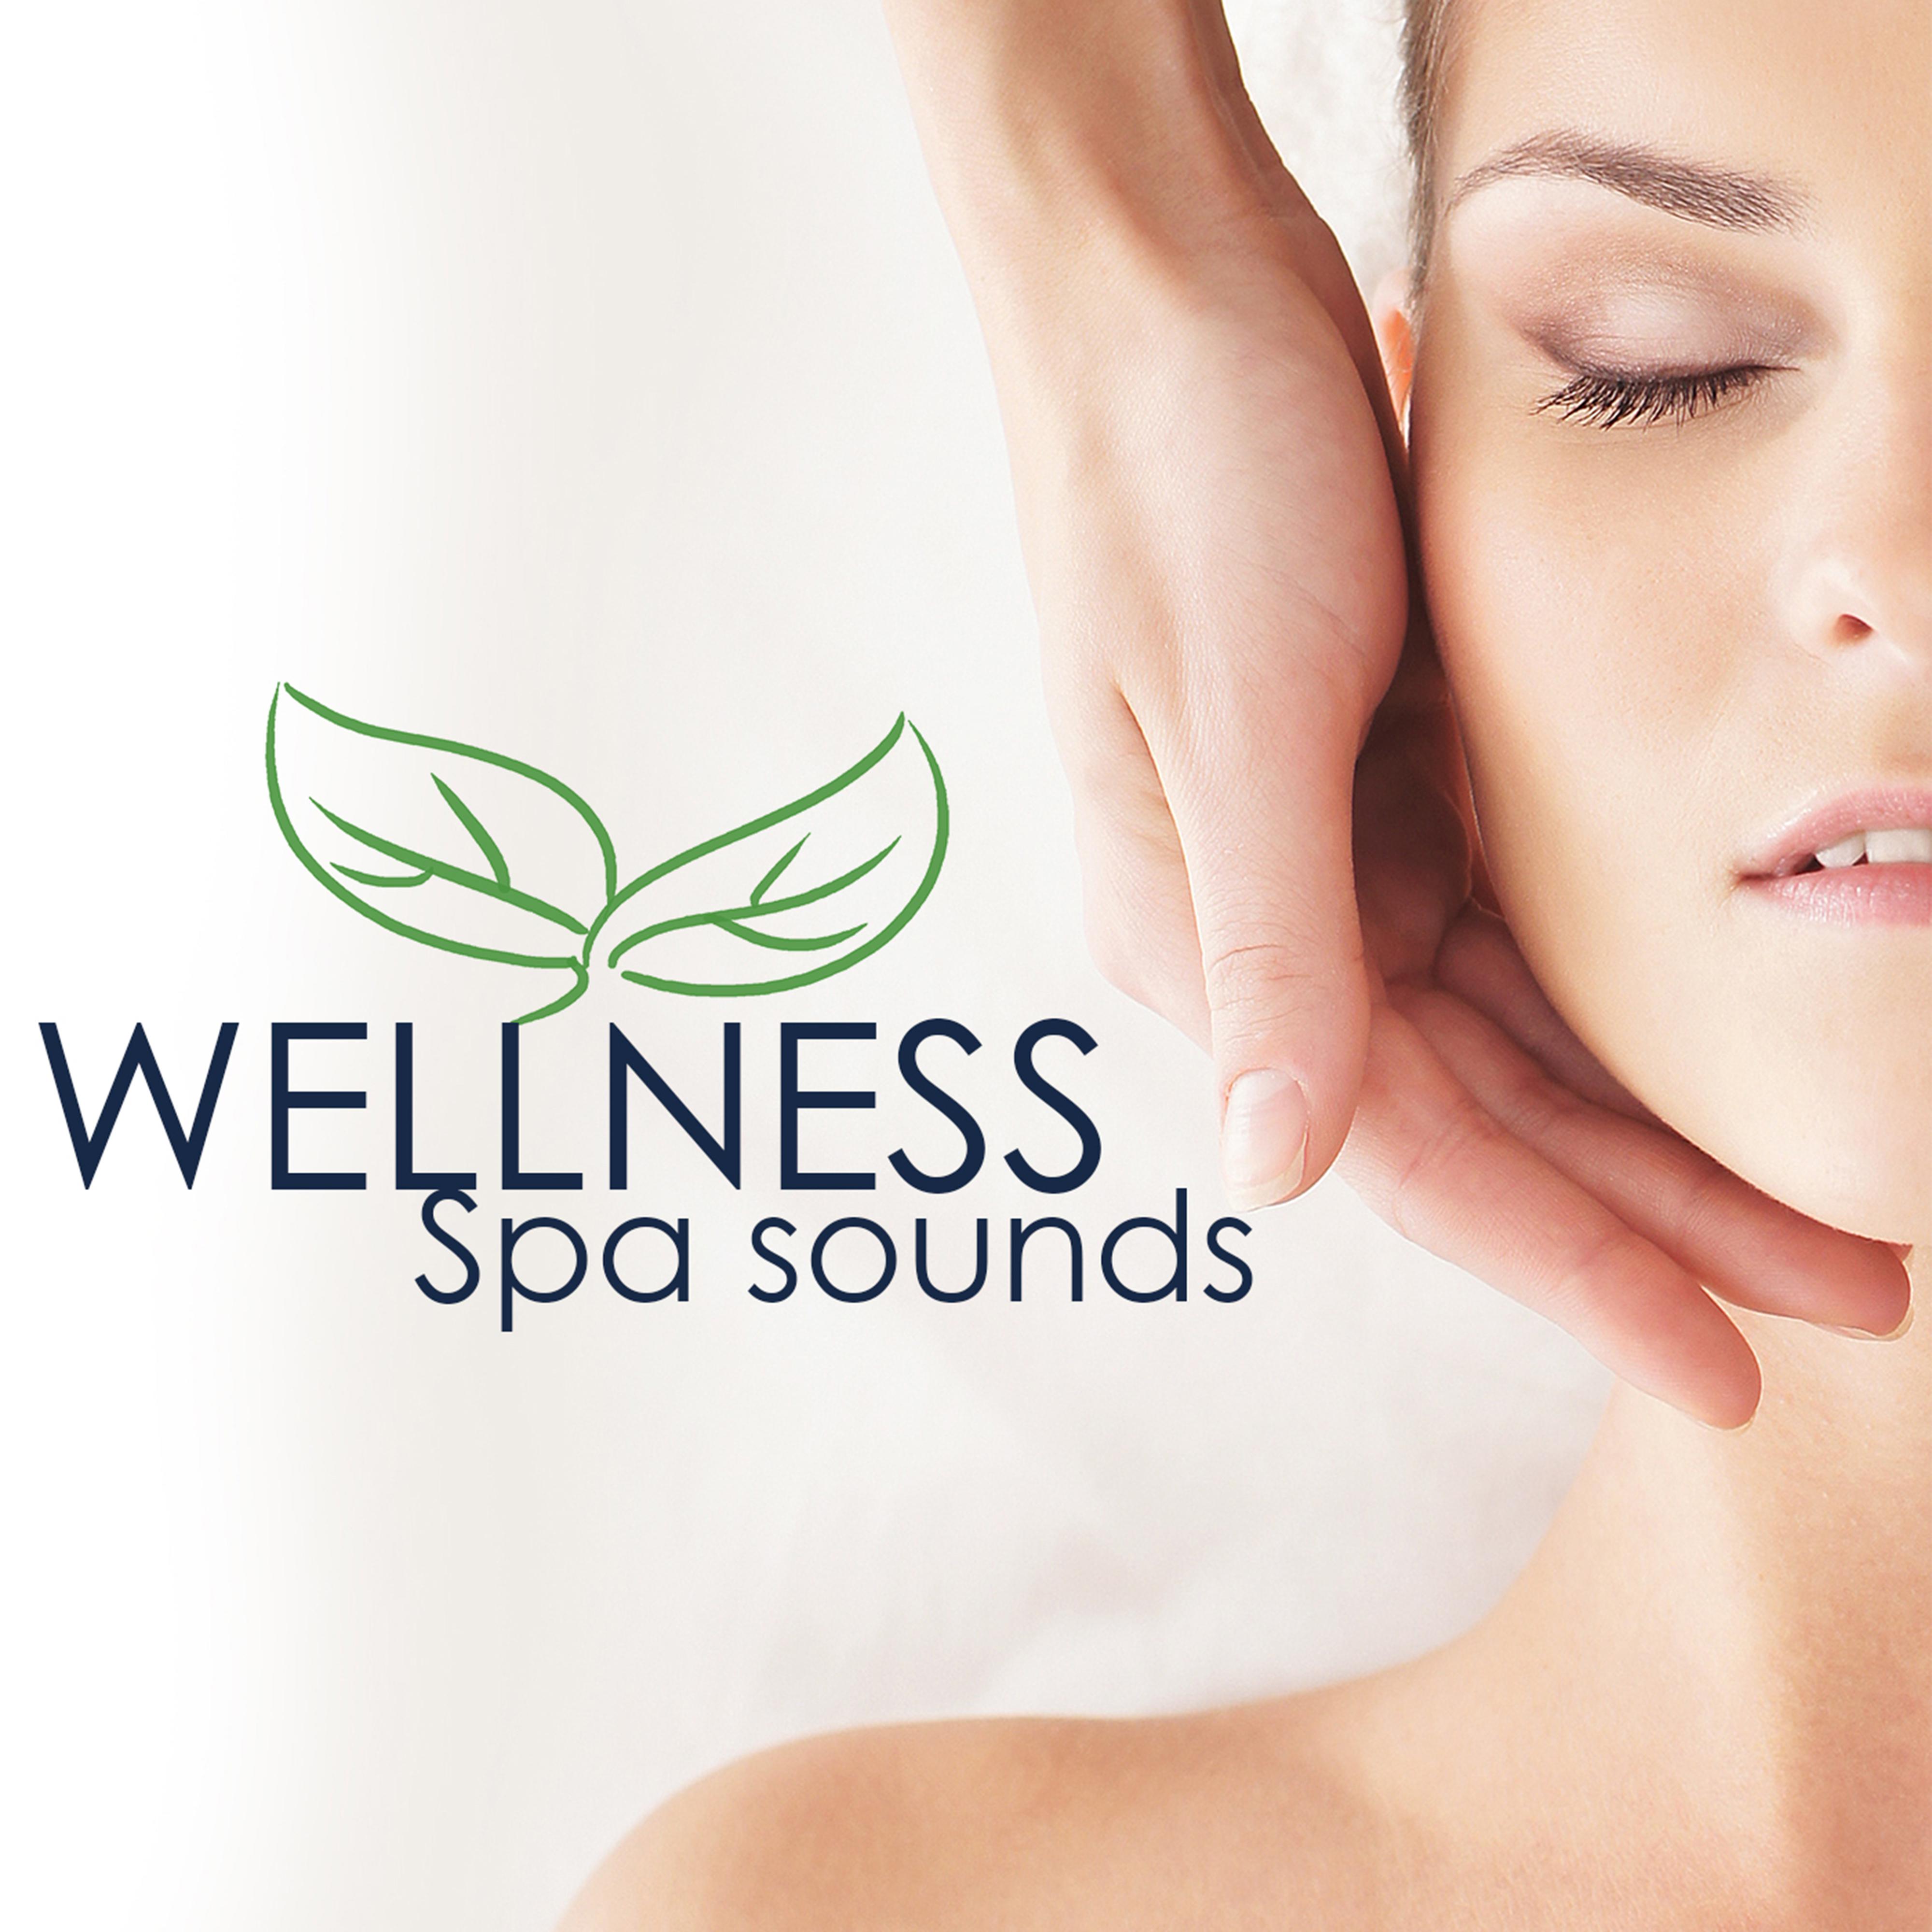 Wellness Spa Sounds - Nature Music for Relaxation, Peaceful Sleep with New Age Music & Relaxing Sounds